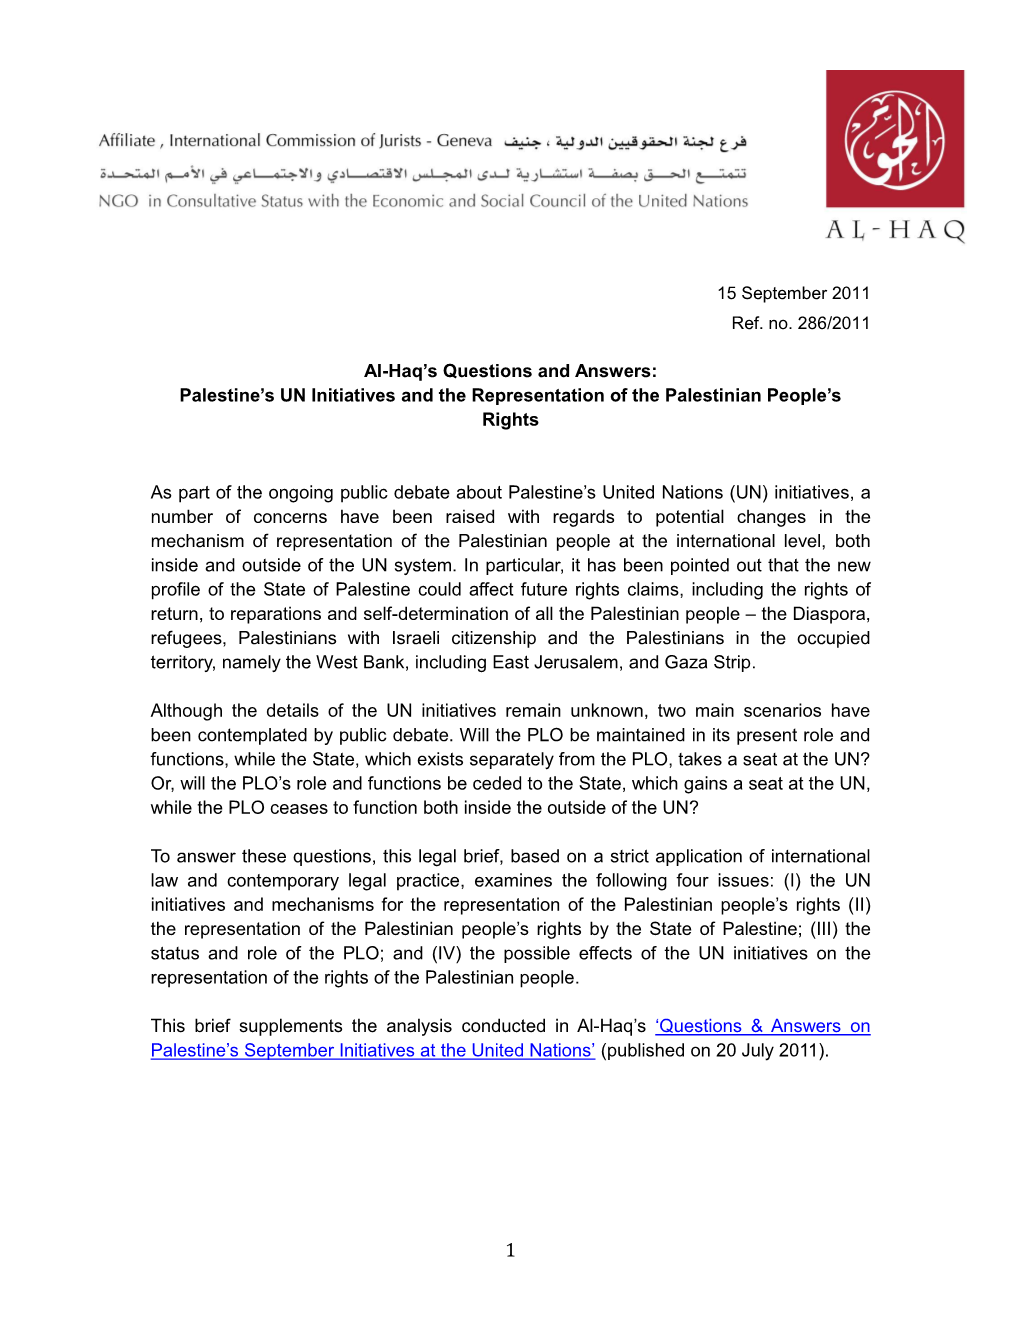 'Al-Haq's Questions and Answers on Palestine's UN Initiatives and The